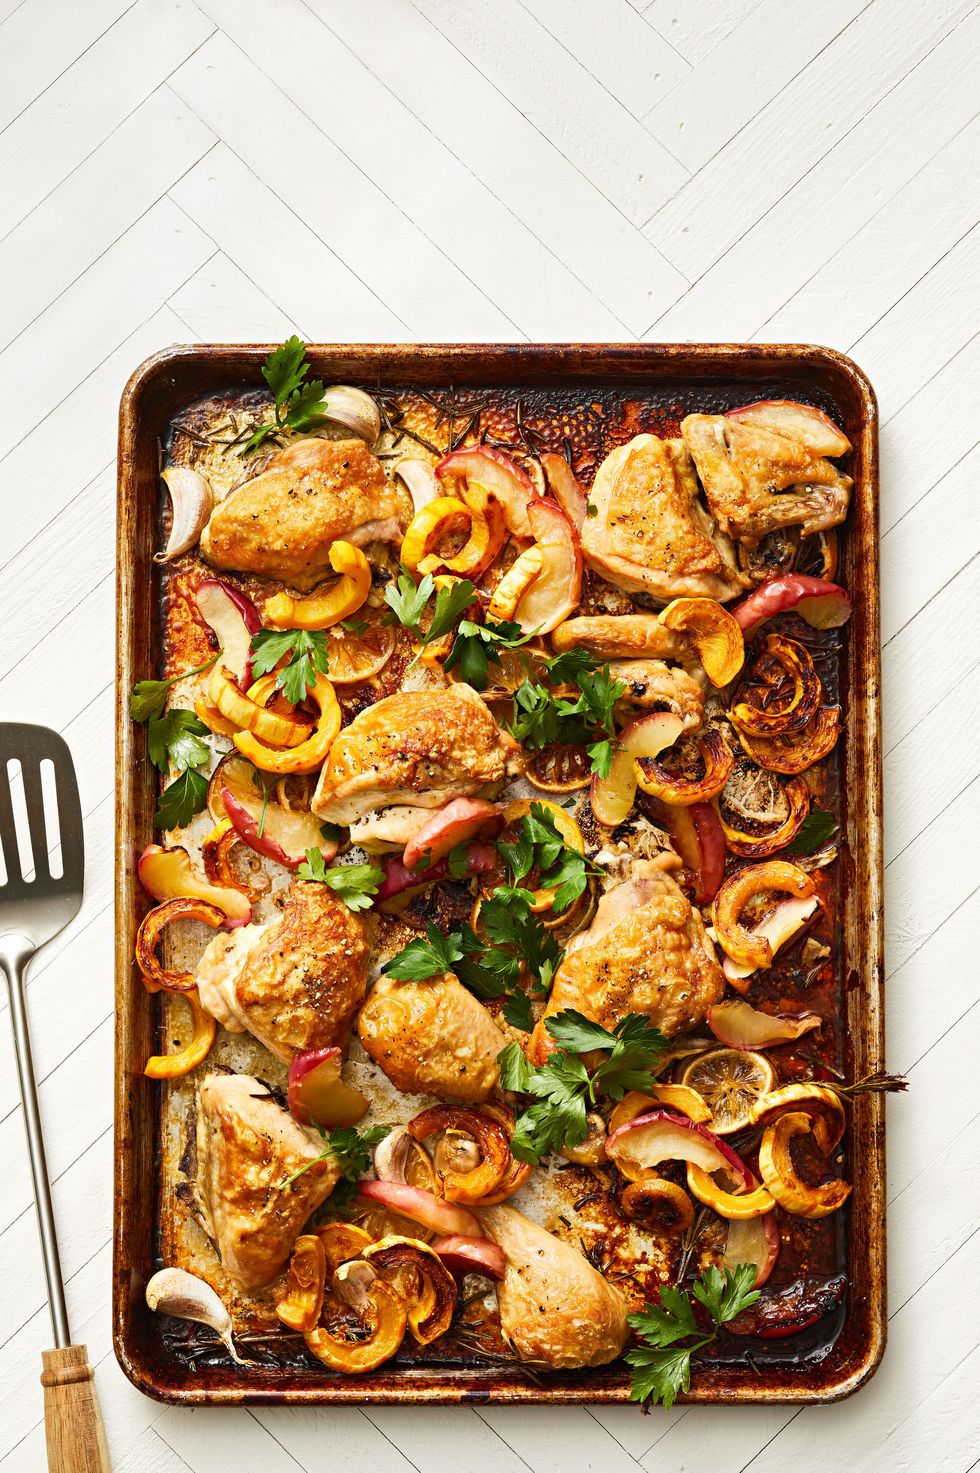 https://hips.hearstapps.com/hmg-prod/images/sheet-pan-chicken-with-apples-and-delicata-squash-654500e319d3a.jpg?crop=0.923xw:0.925xh;0.0425xw,0.0749xh&resize=980:*